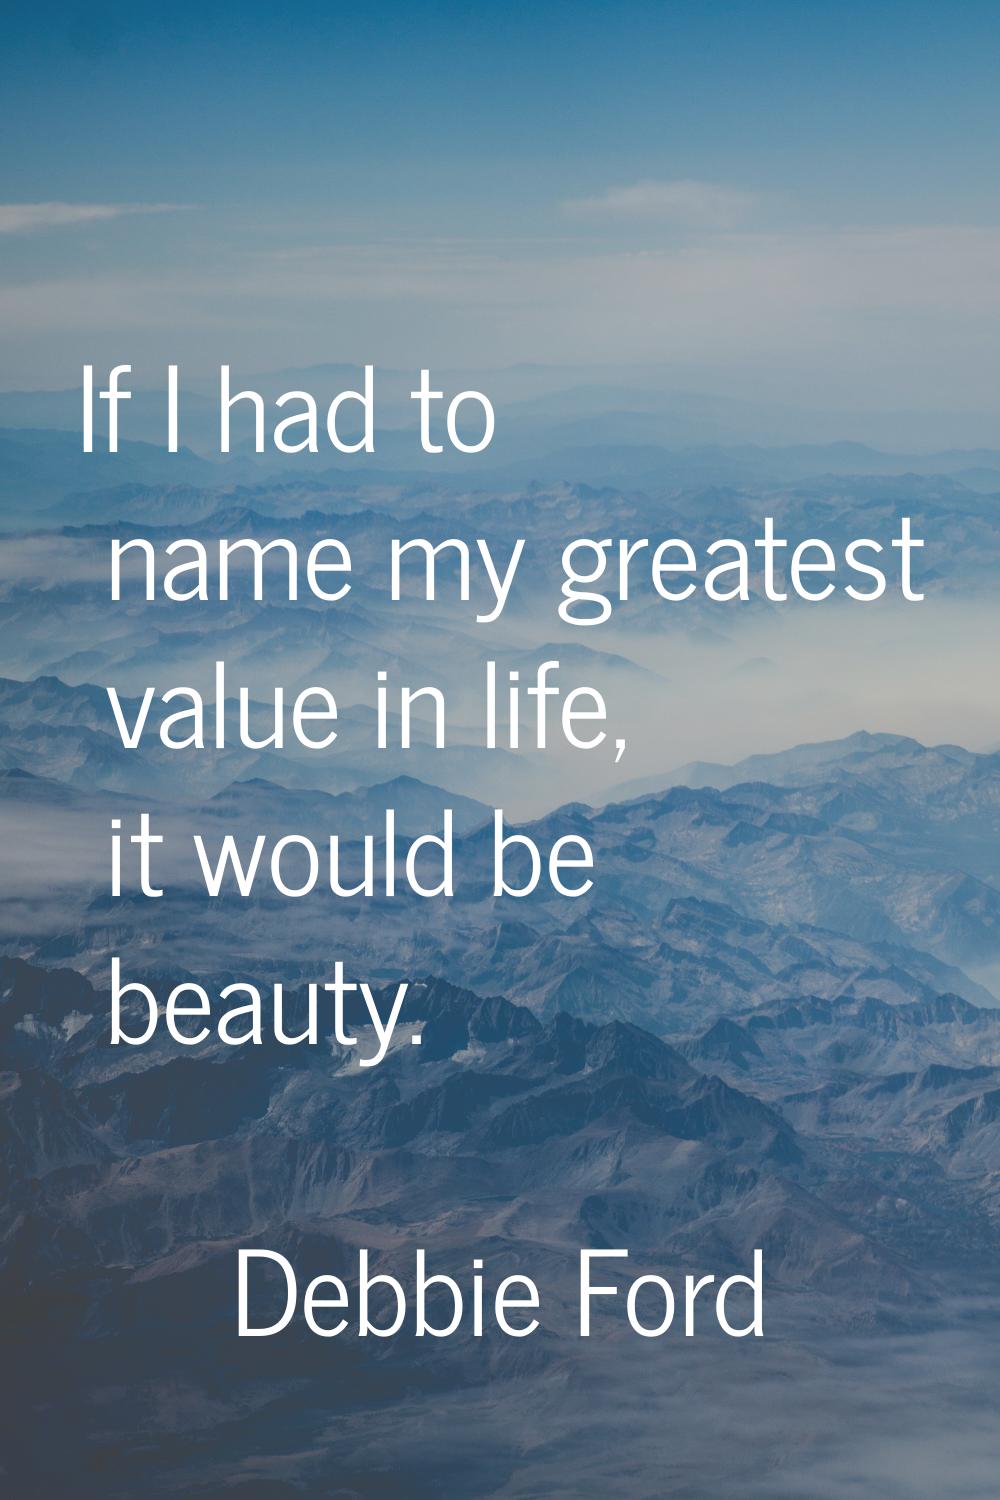 If I had to name my greatest value in life, it would be beauty.